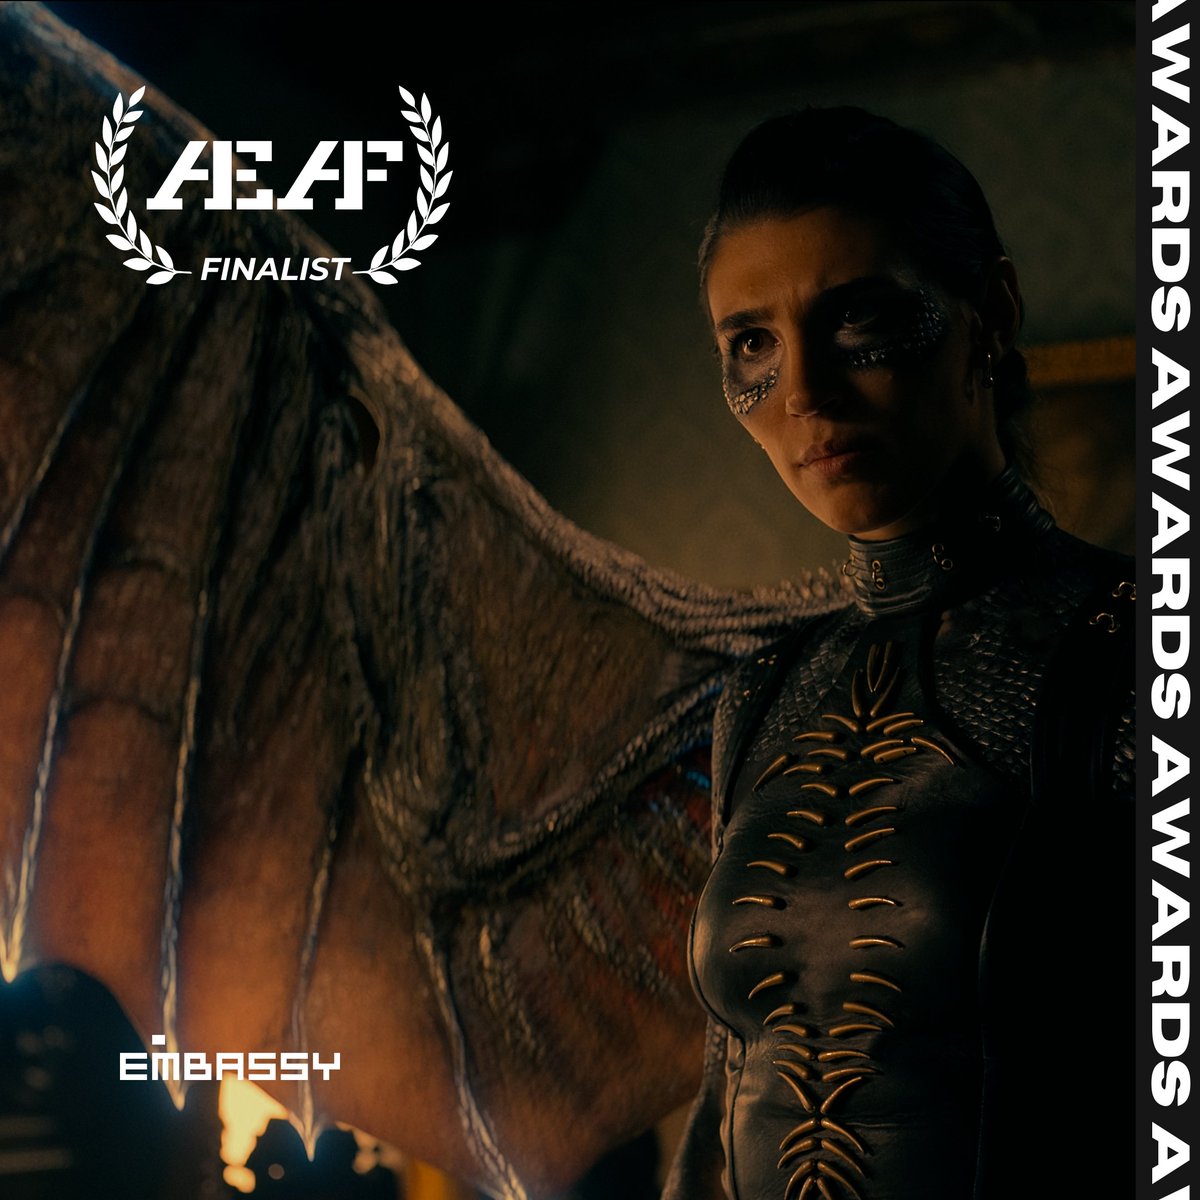 AWARDS | We're looking forward to next month's AEAF awards! Warrior Nun is a finalist amongst some excellent work in the 'Best Visual Effects - TV Series' category! You can check out the full list of finalists here » aeaf.tv/news/aeaf-awar… #vfx #animation #warriornun #AEAF